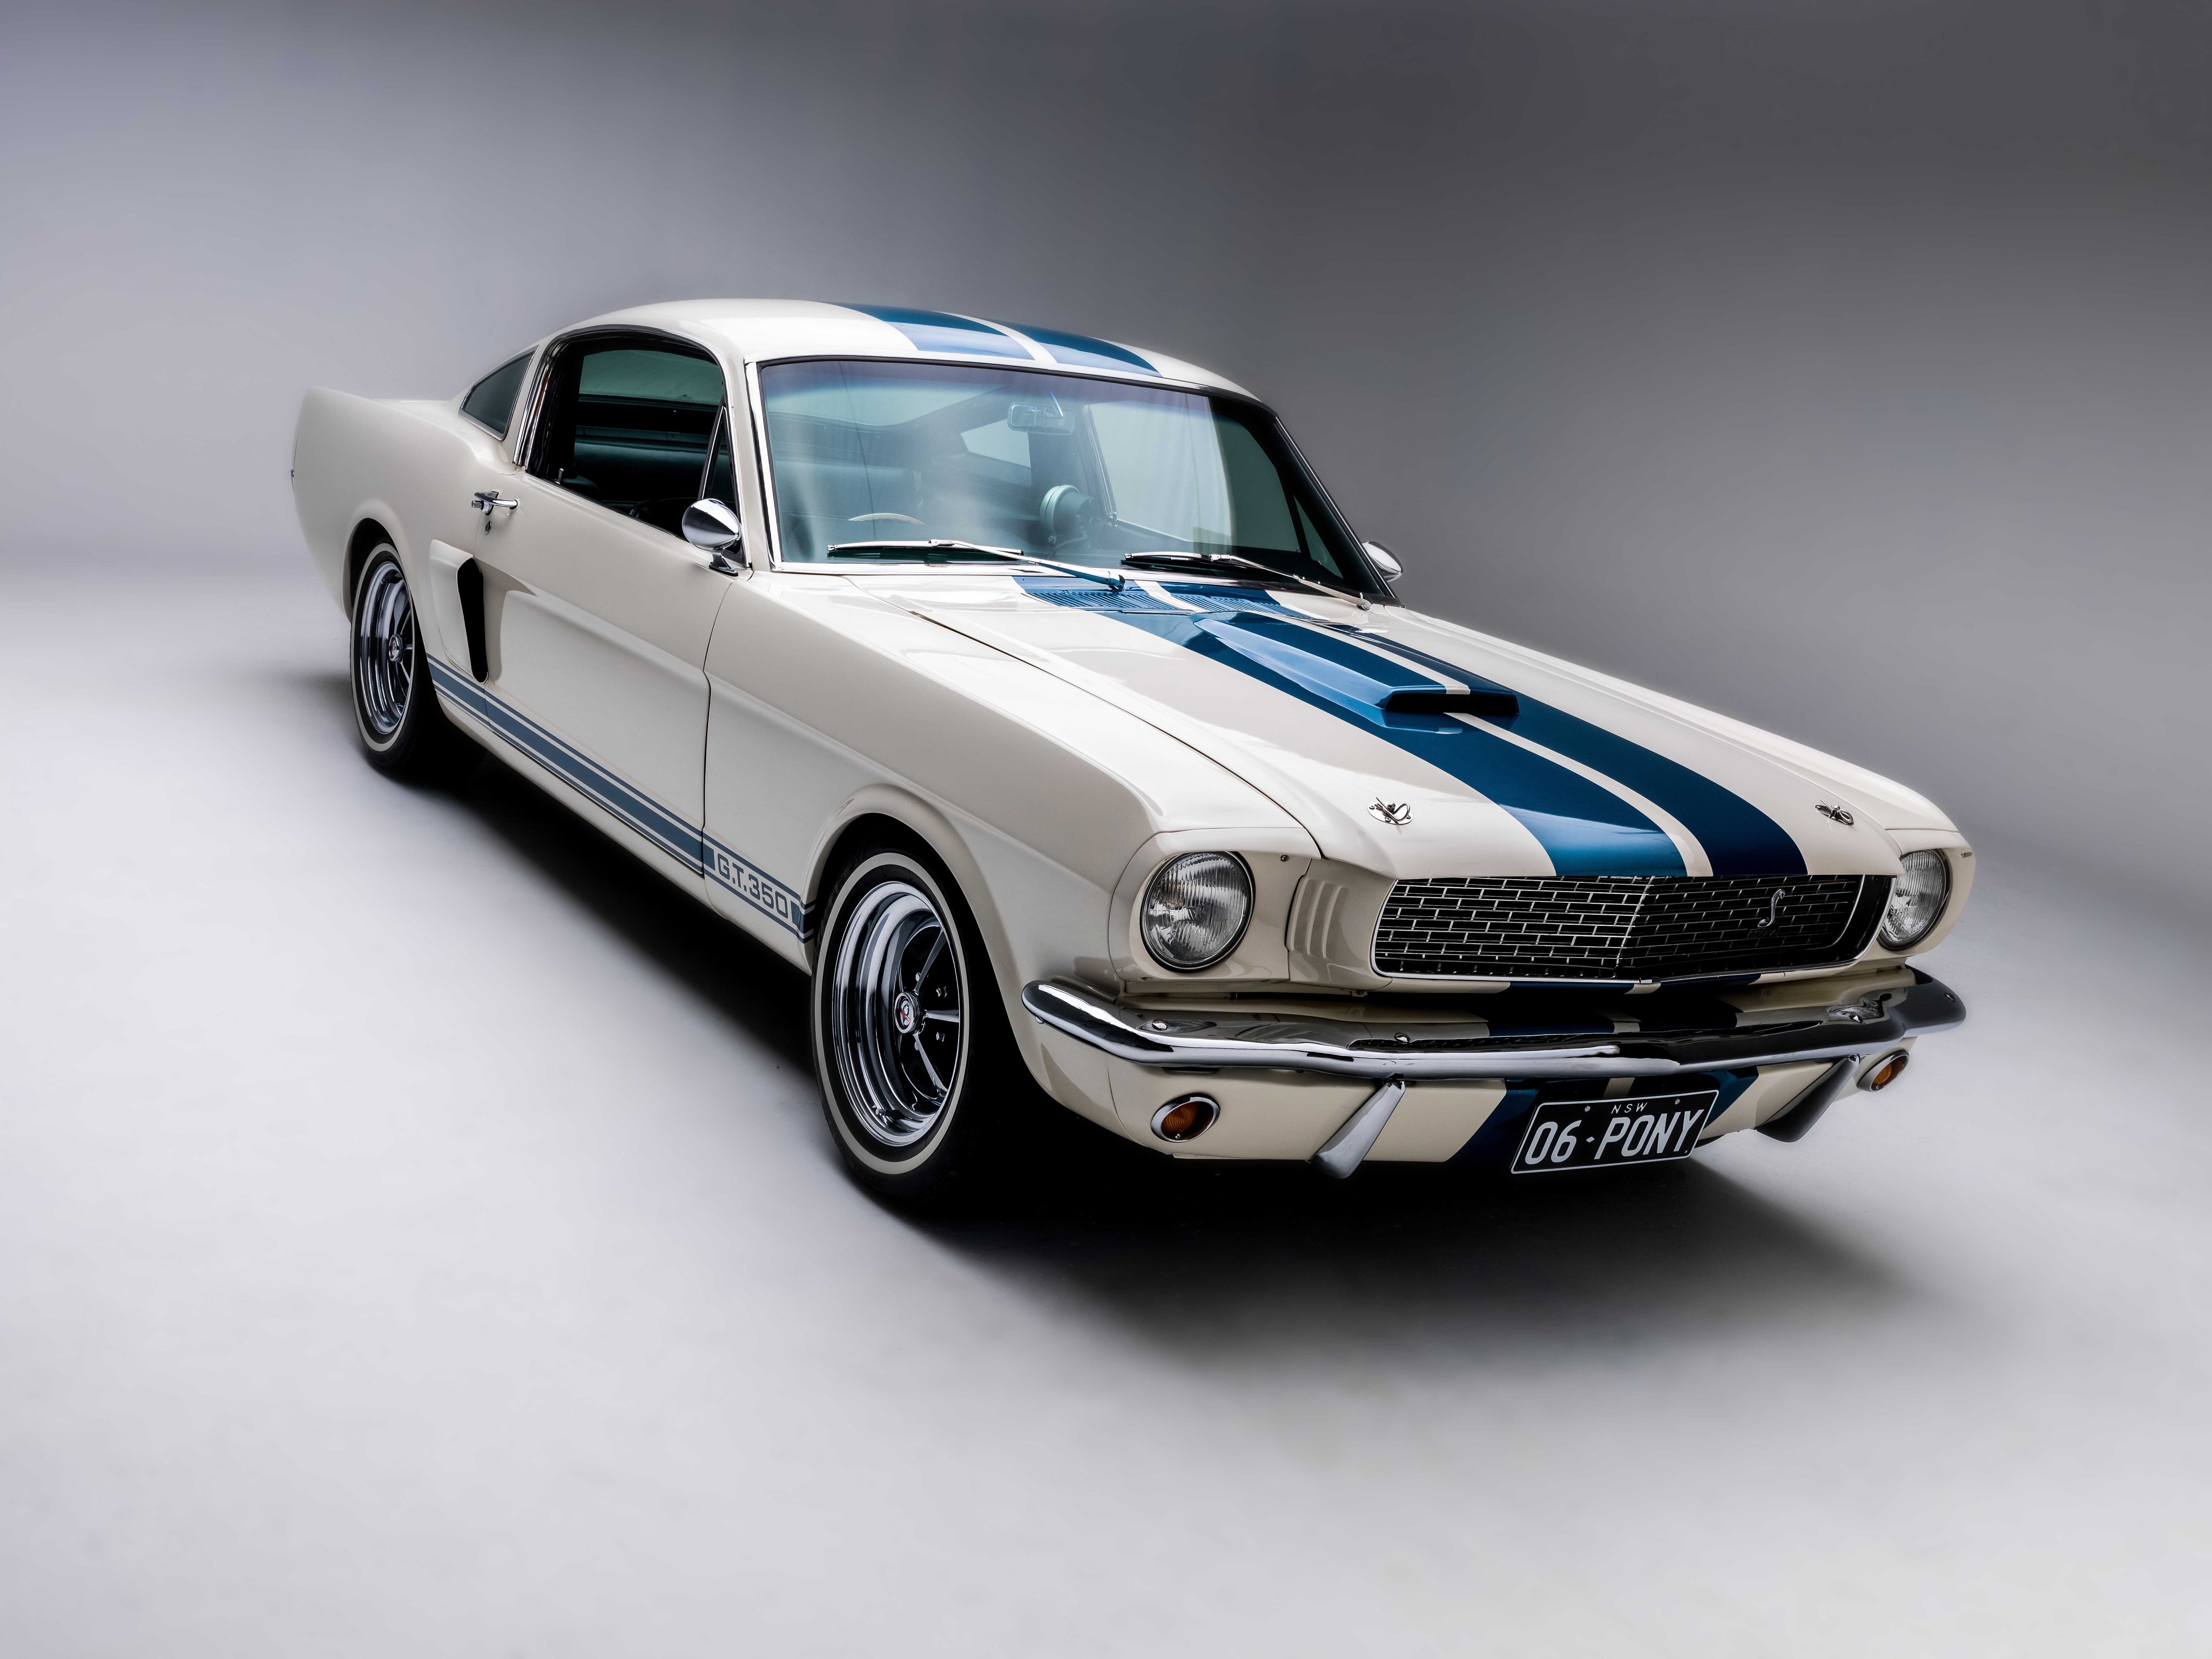 Free download wallpaper Ford, Car, Muscle Car, Fastback, Vehicles, White Car, Ford Shelby Gt350, Shelby Gt350 on your PC desktop